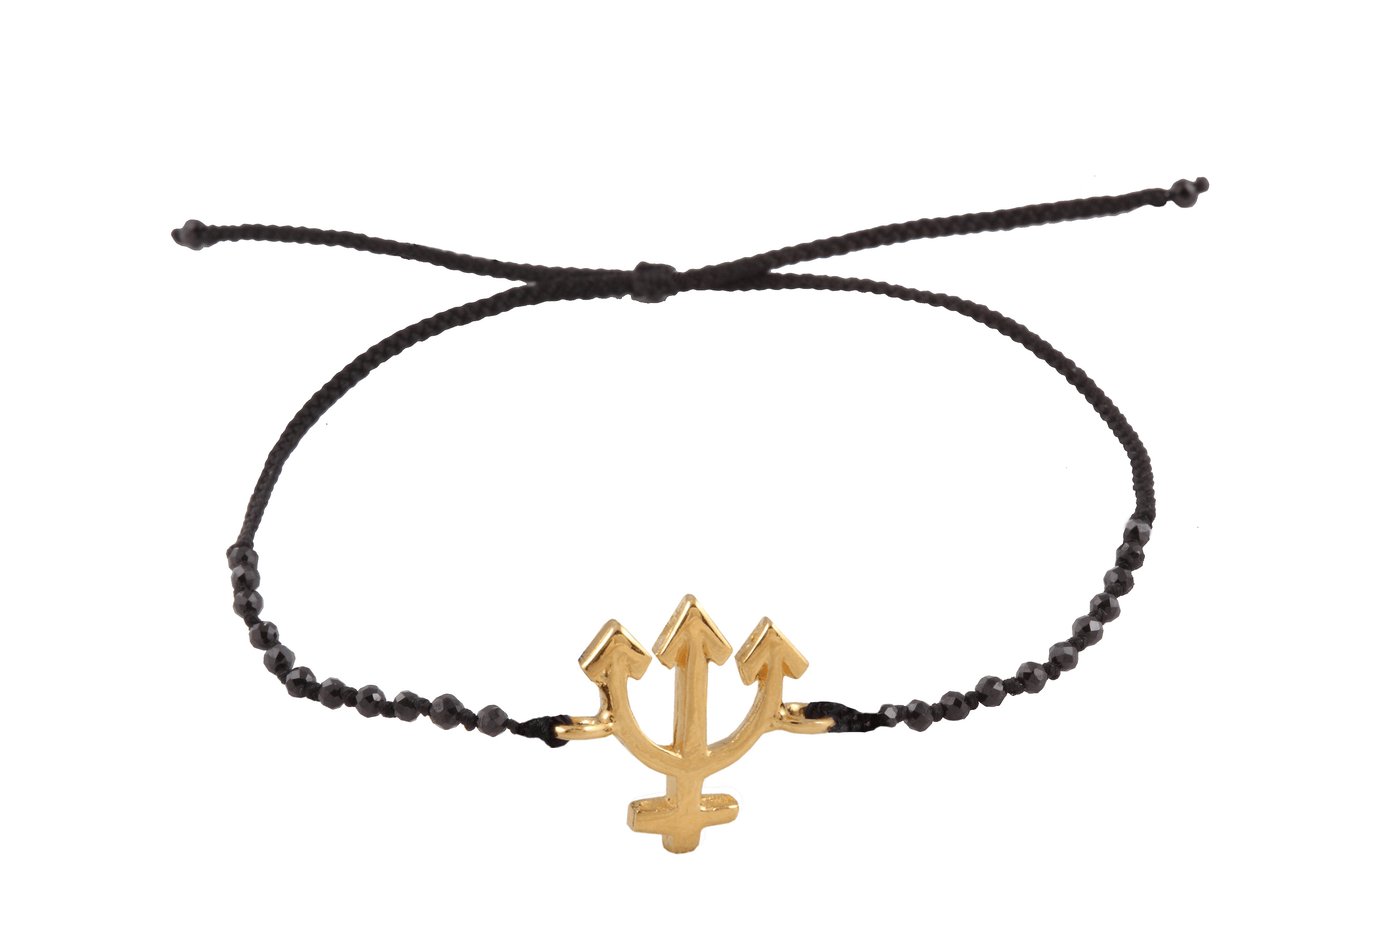 Neptune Amulet bracelet with beads. Gold plated